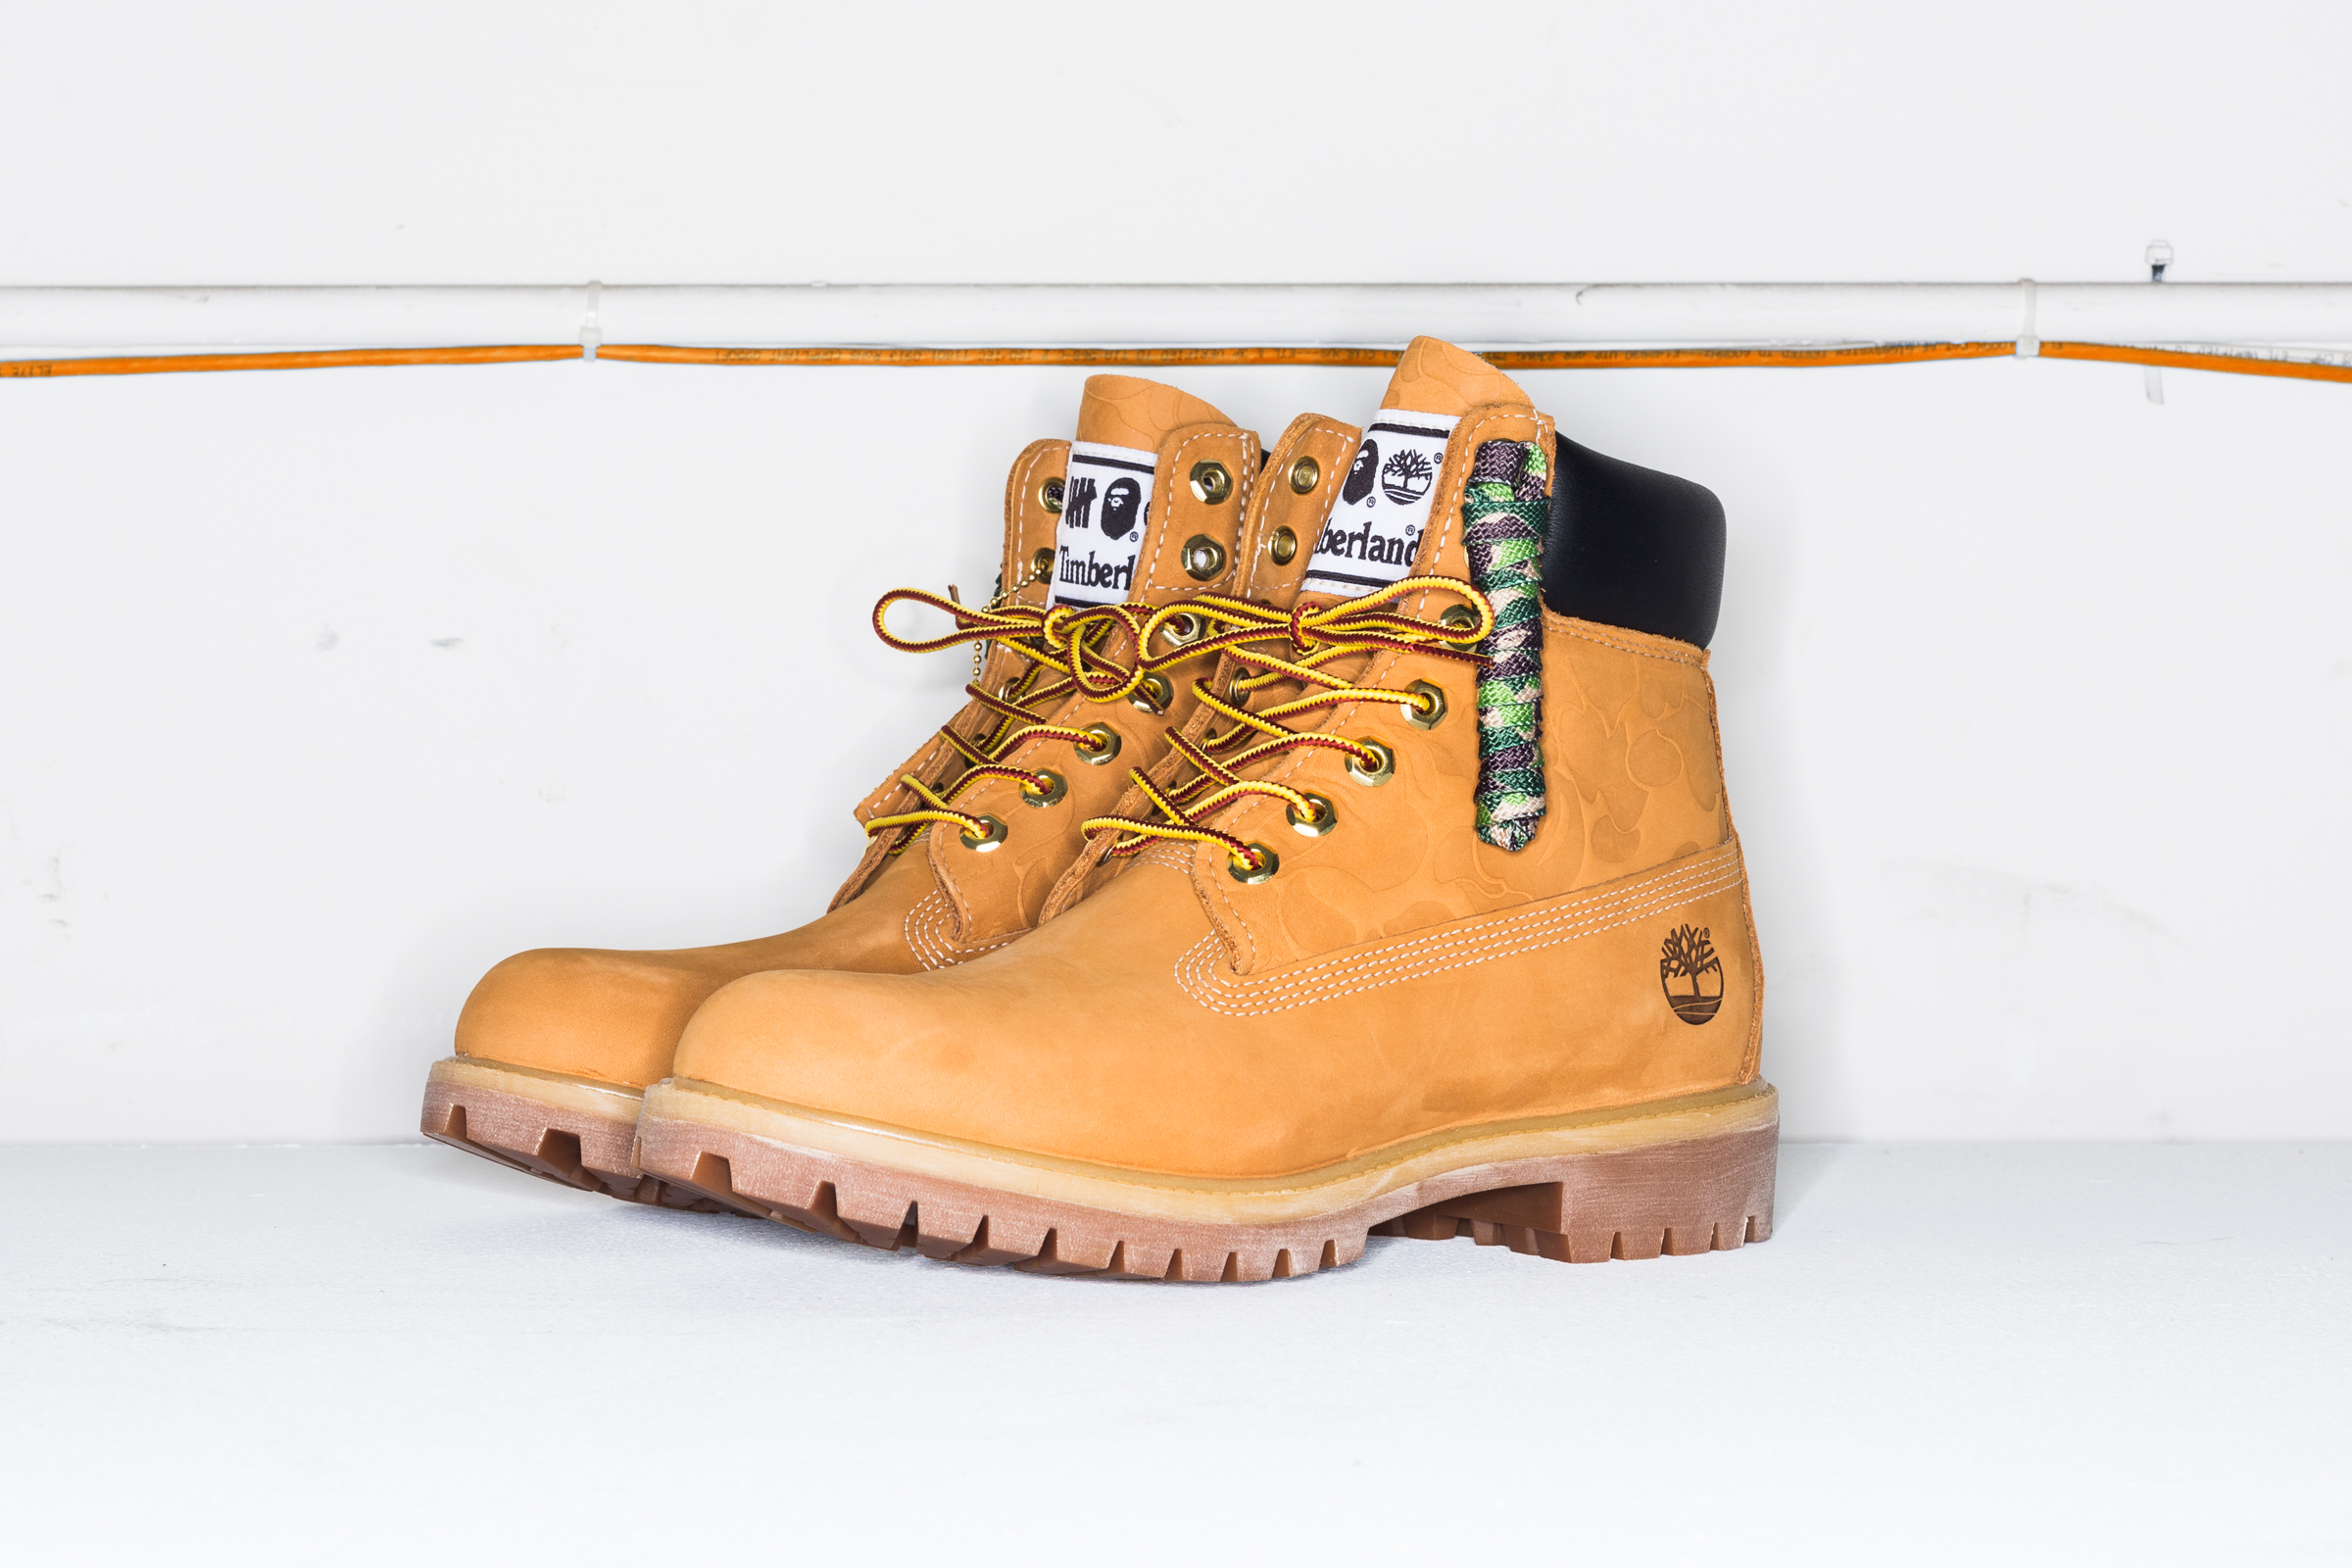 undefeated bape timberland toddler boot release date